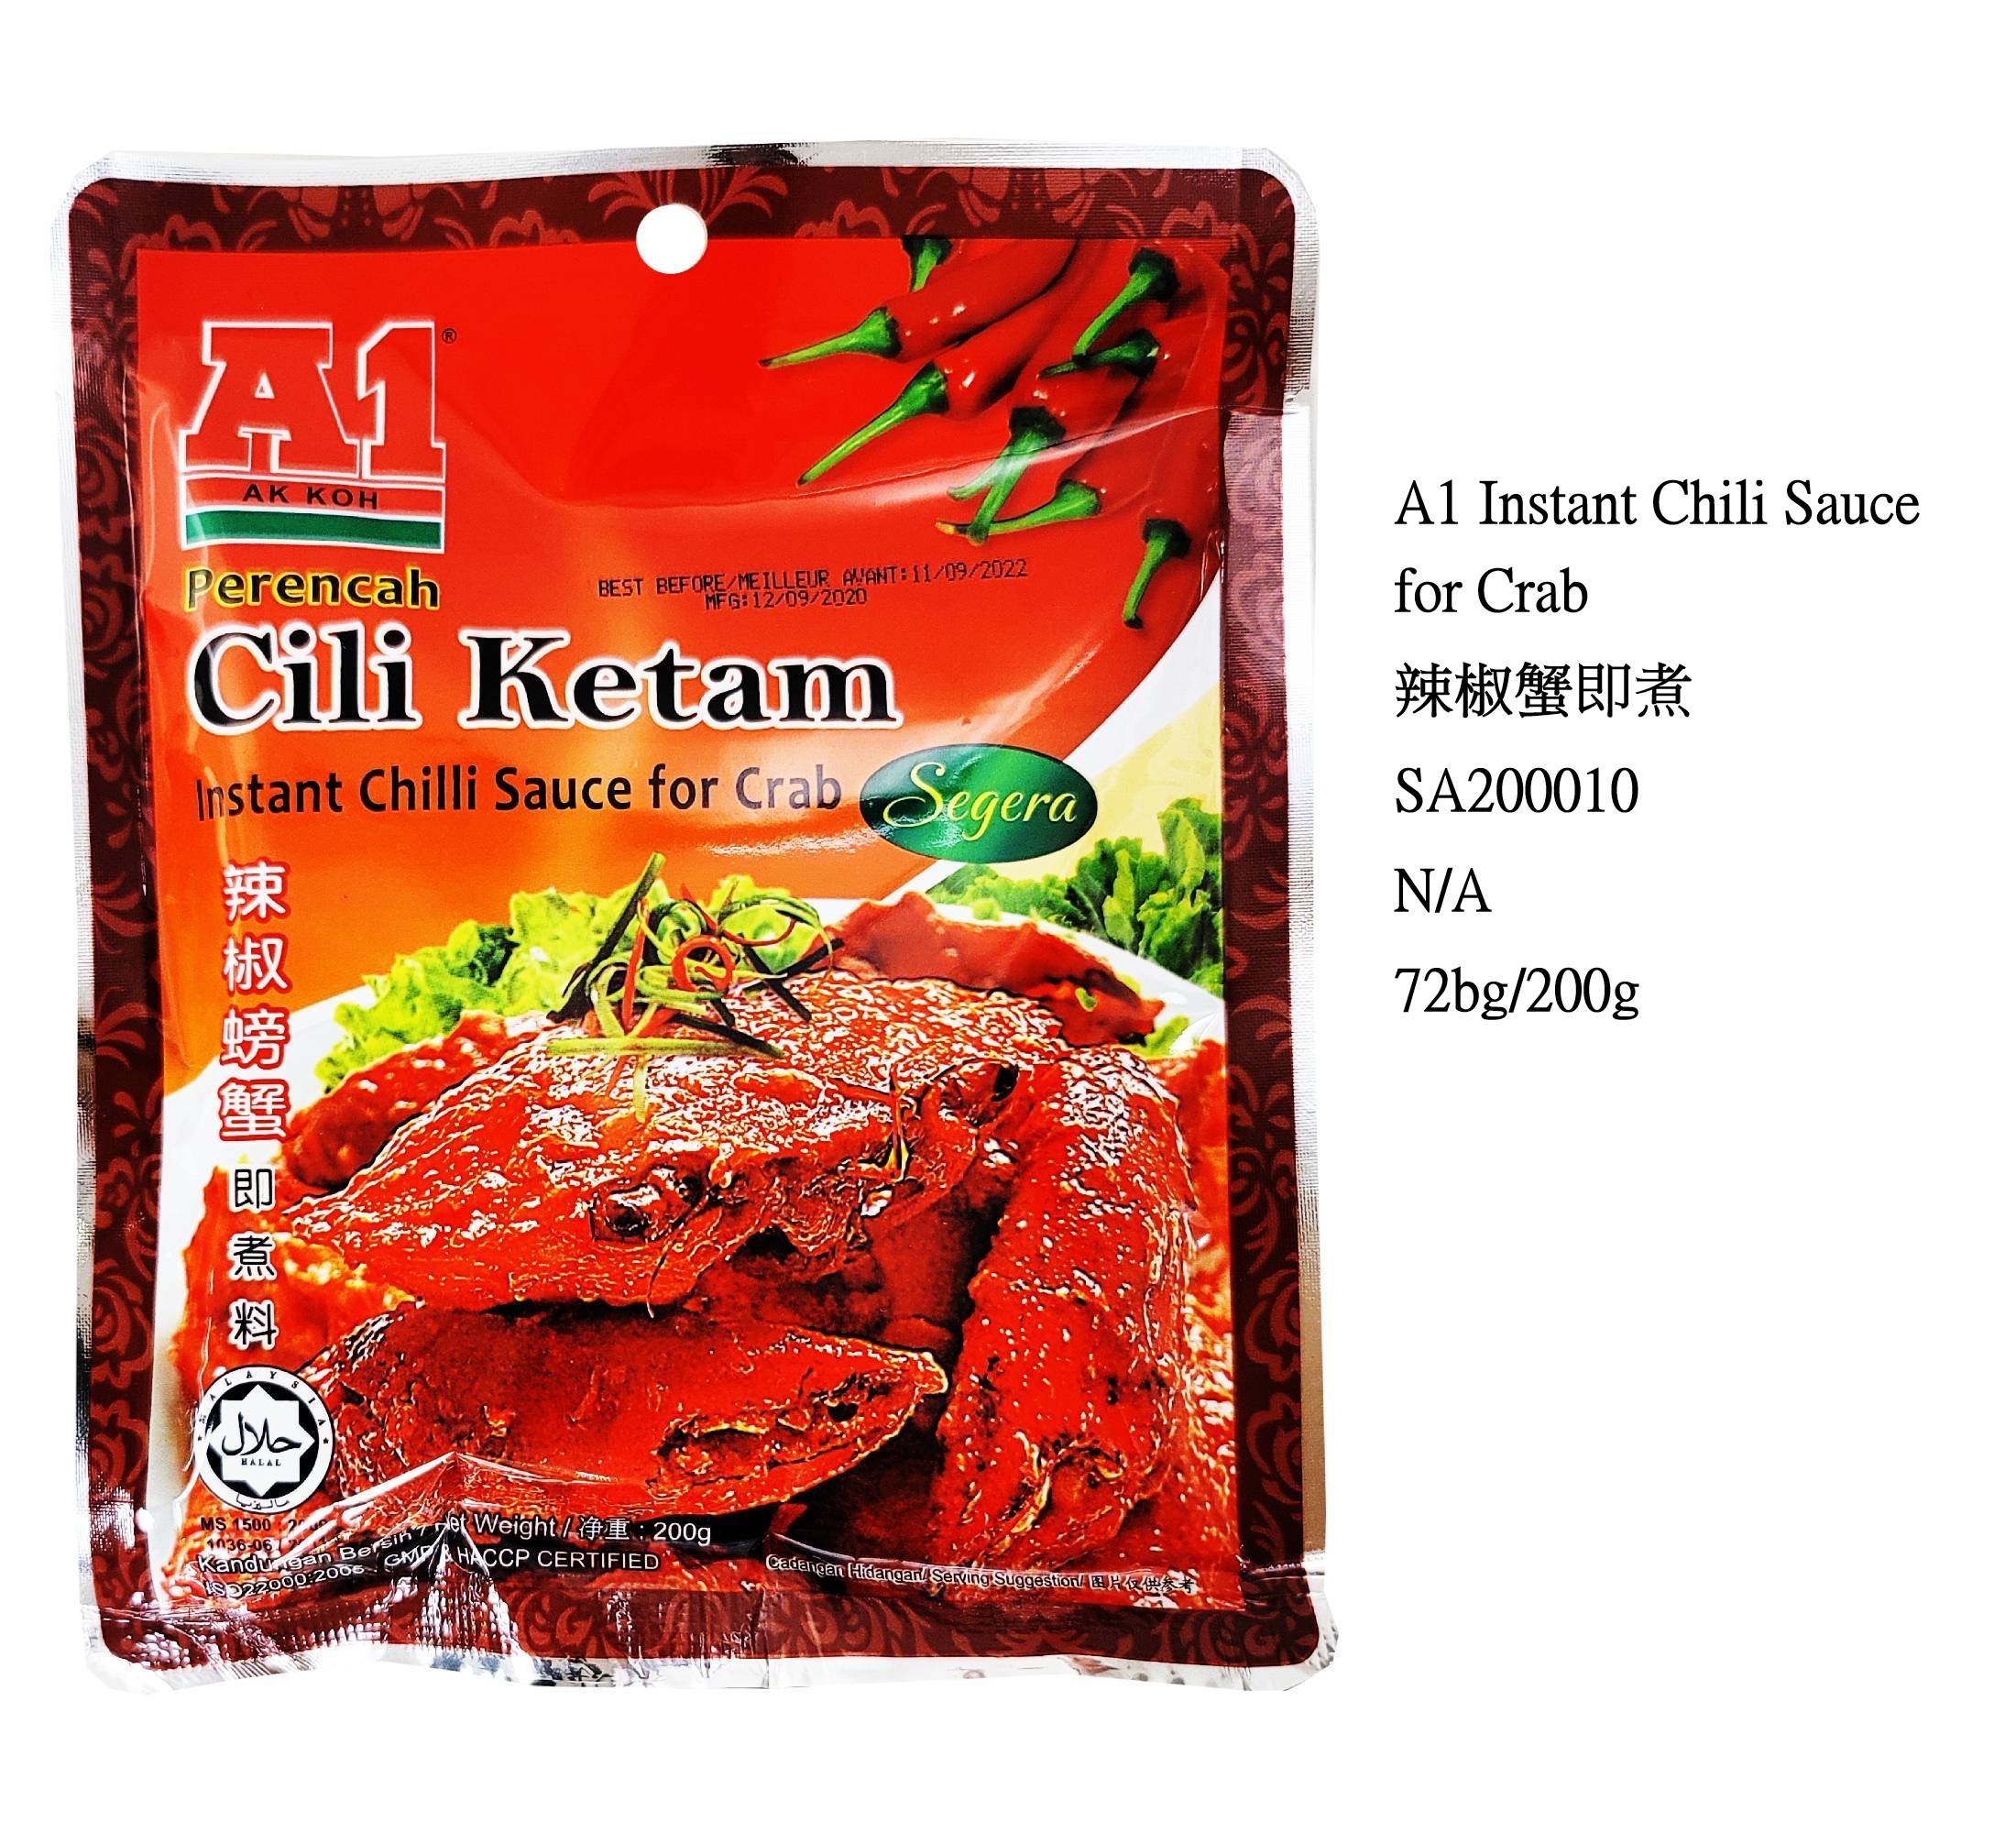 A1 INSTANT CHILI AUCE FOR CRAB SA200010